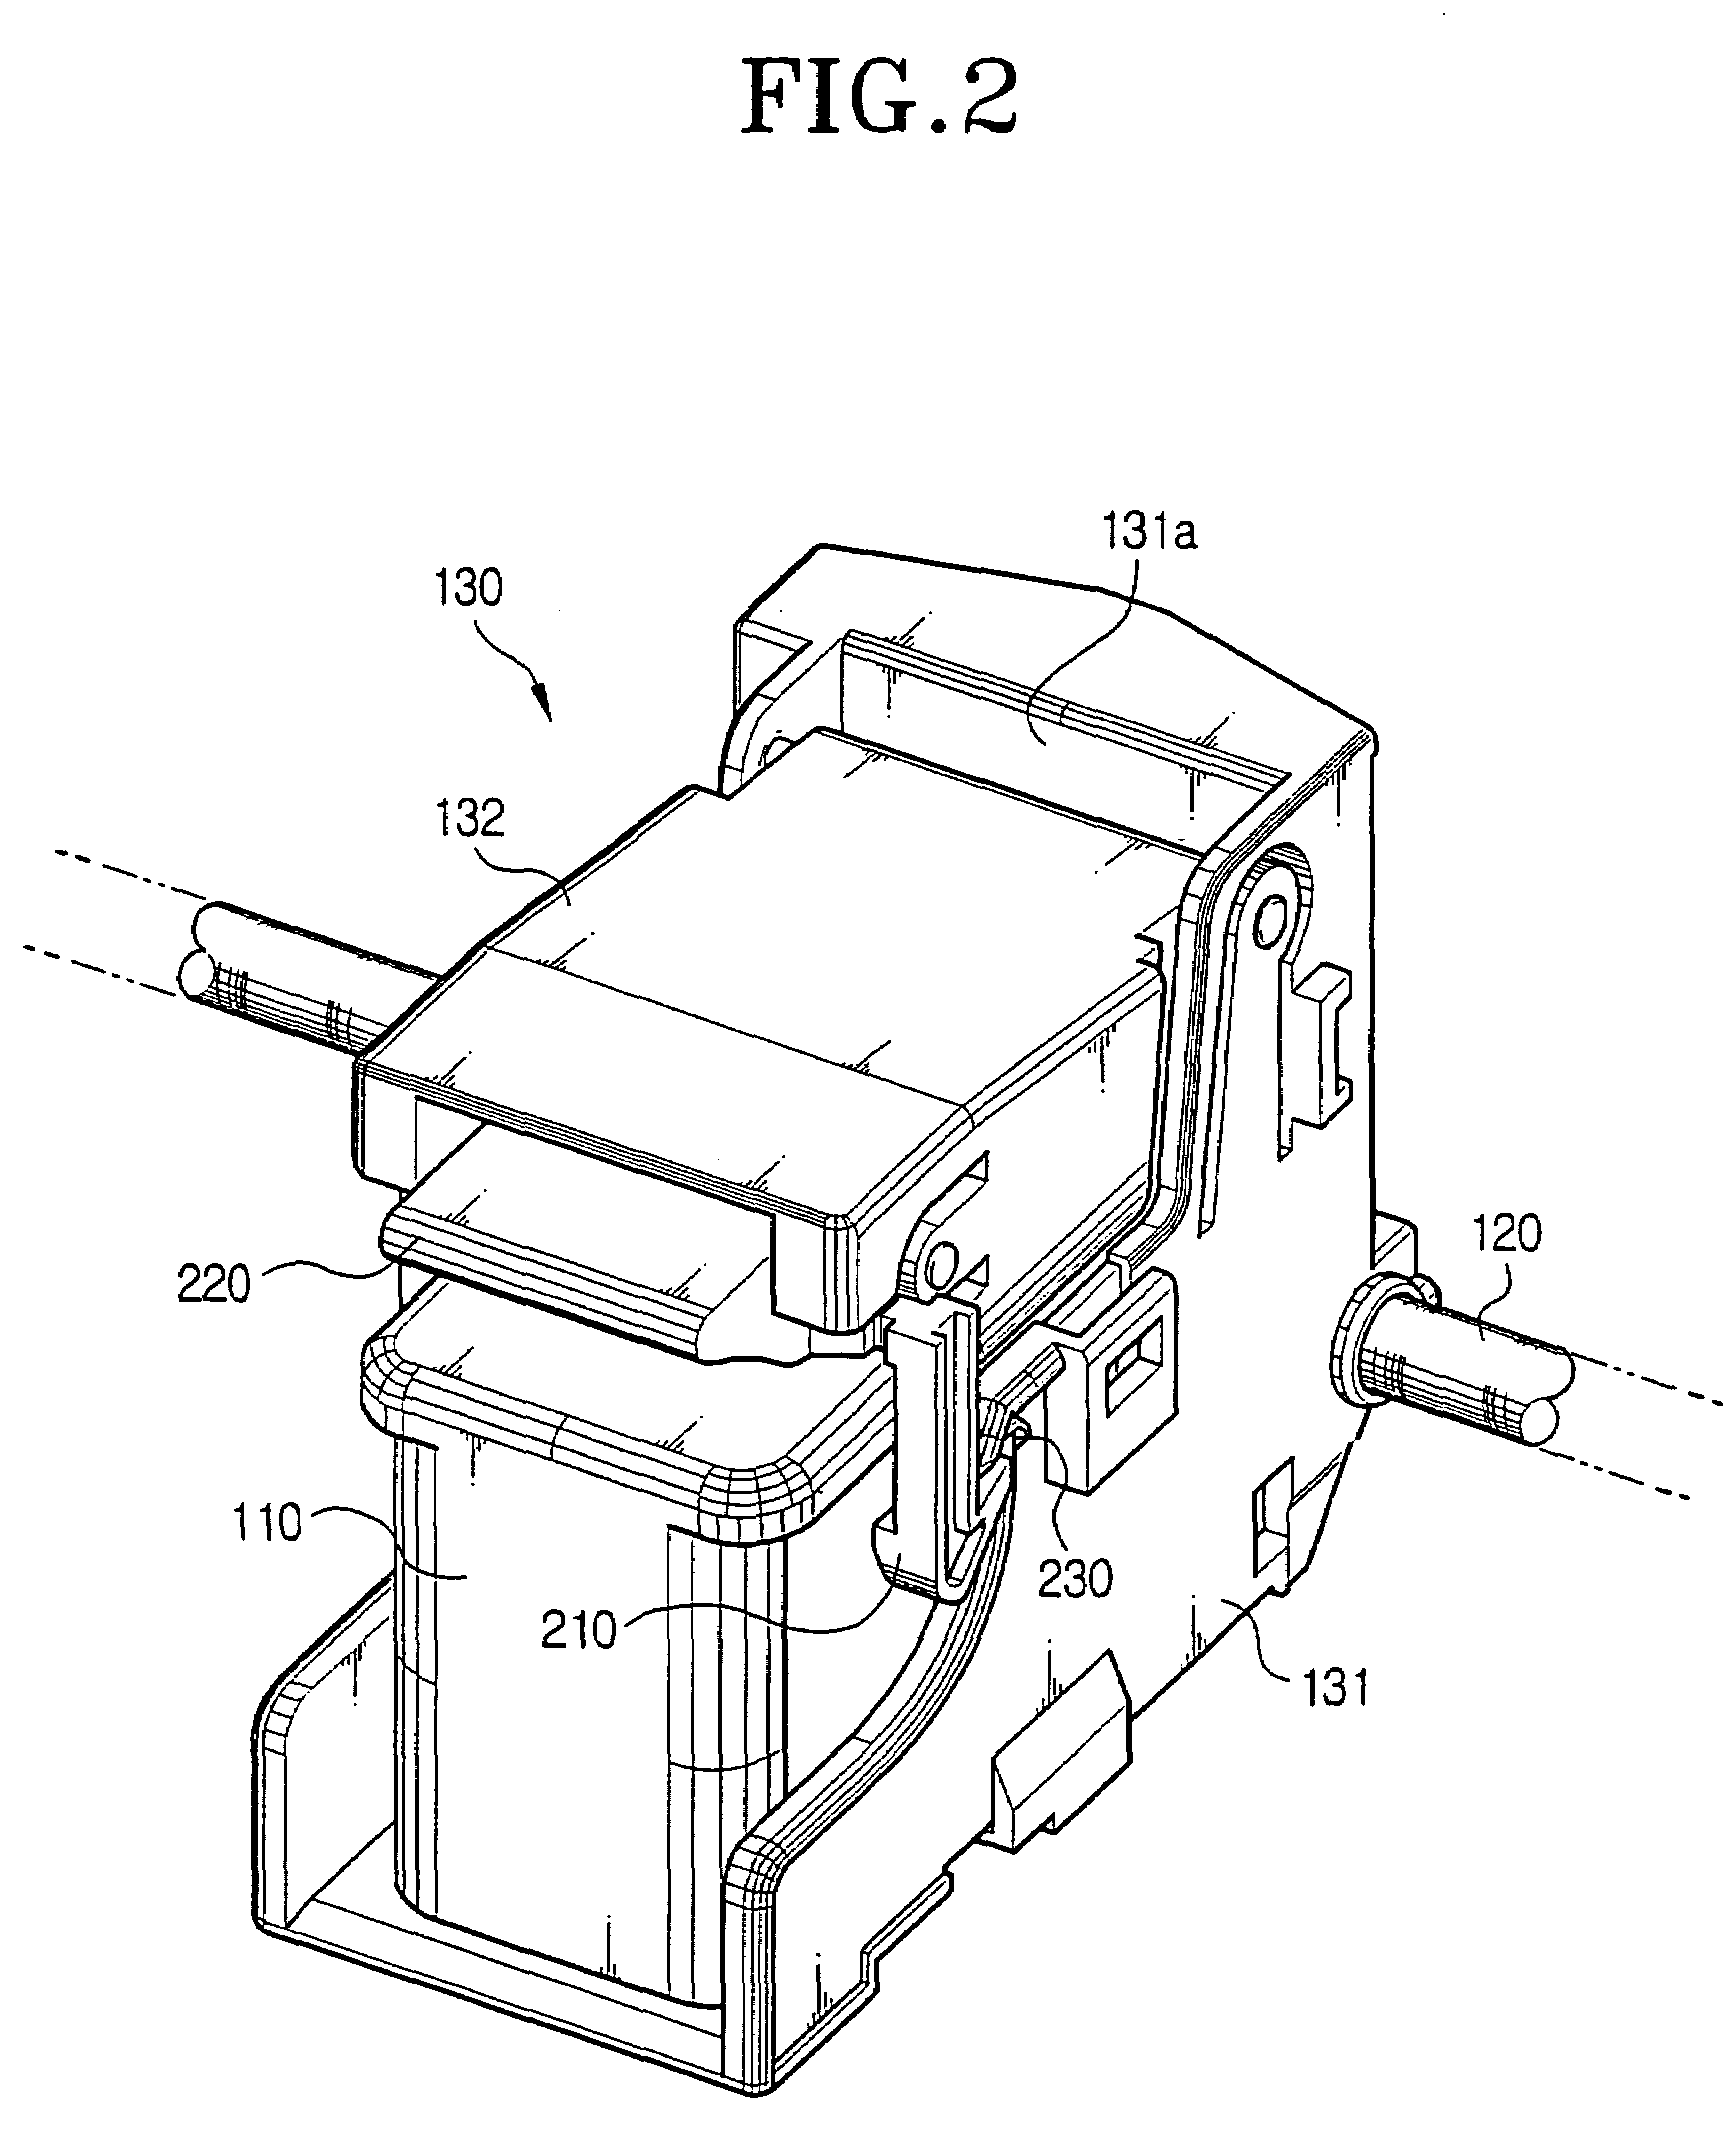 Carriage for ink cartridge of image forming apparatus